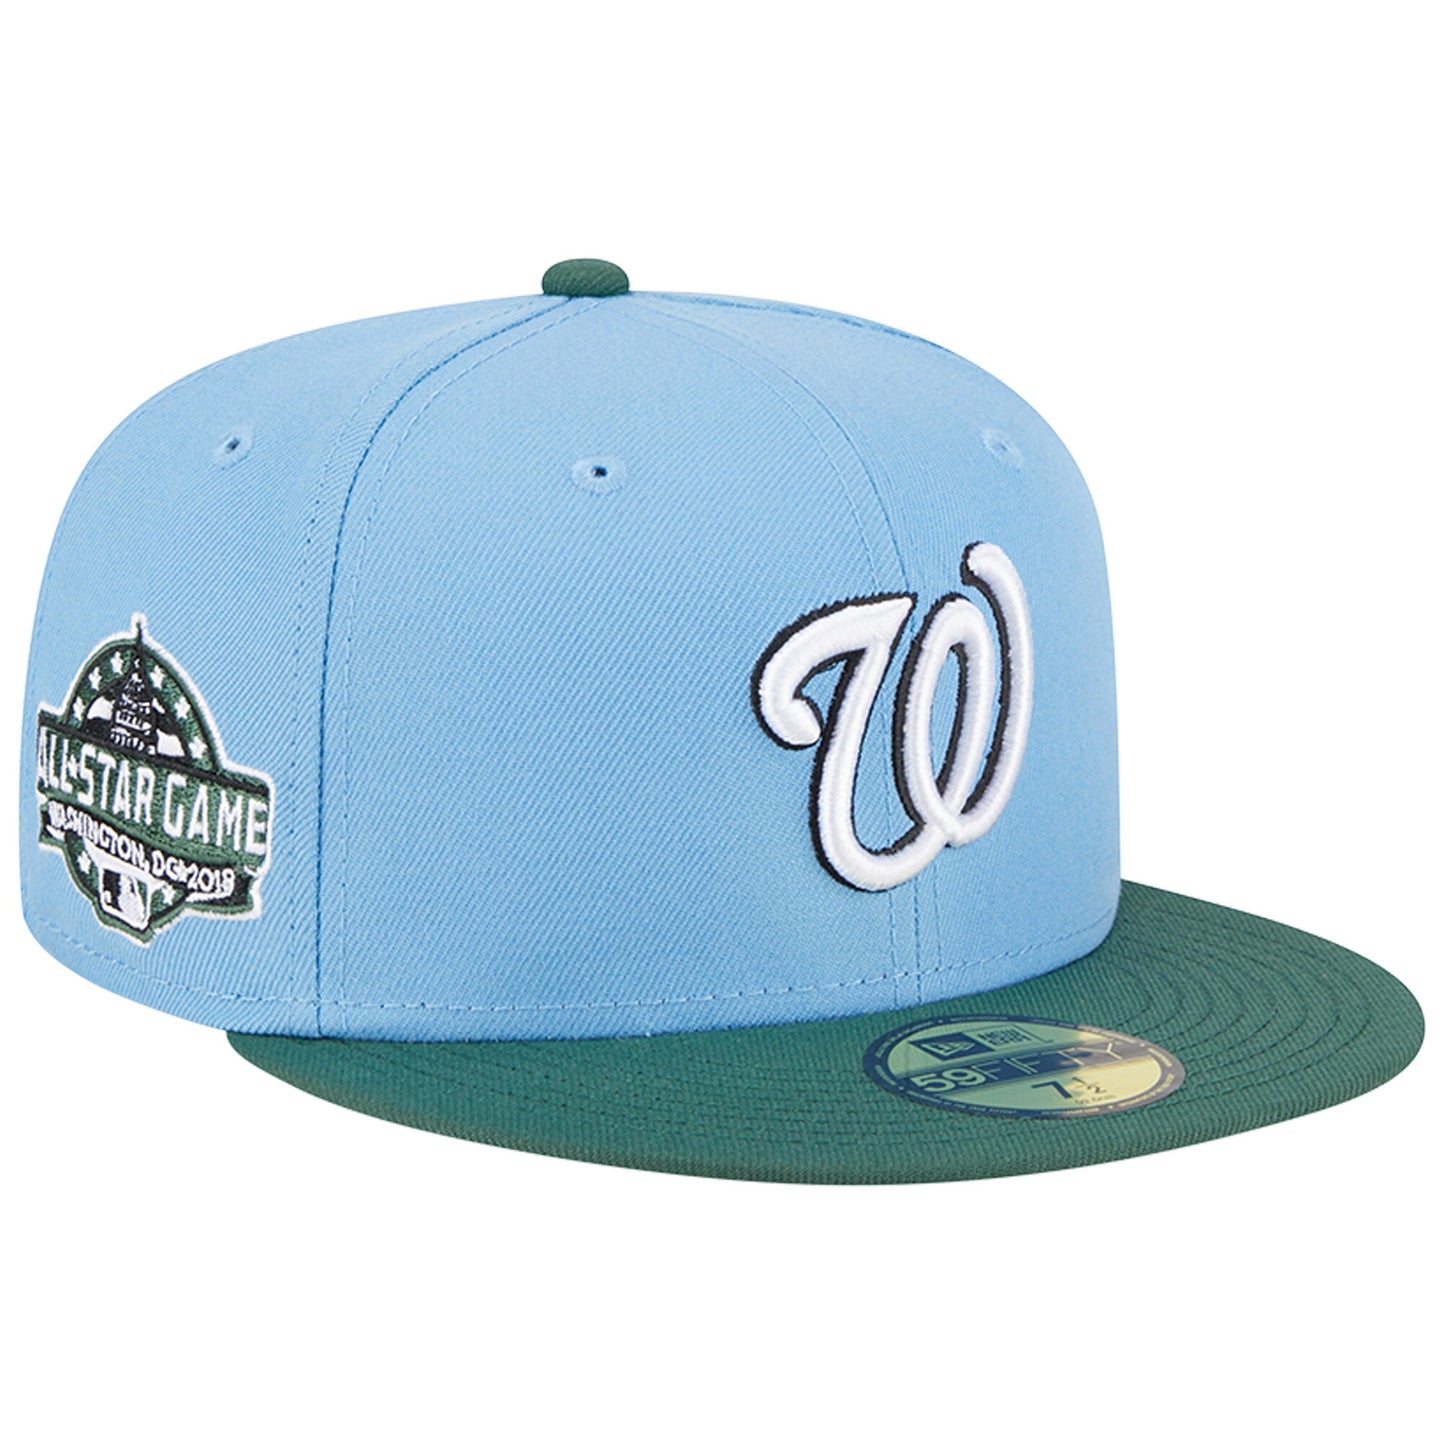 Washington Nationals New Era 2018 MLB All-Star Game 59FIFTY Fitted Hat - Sky Blue/Cilantro